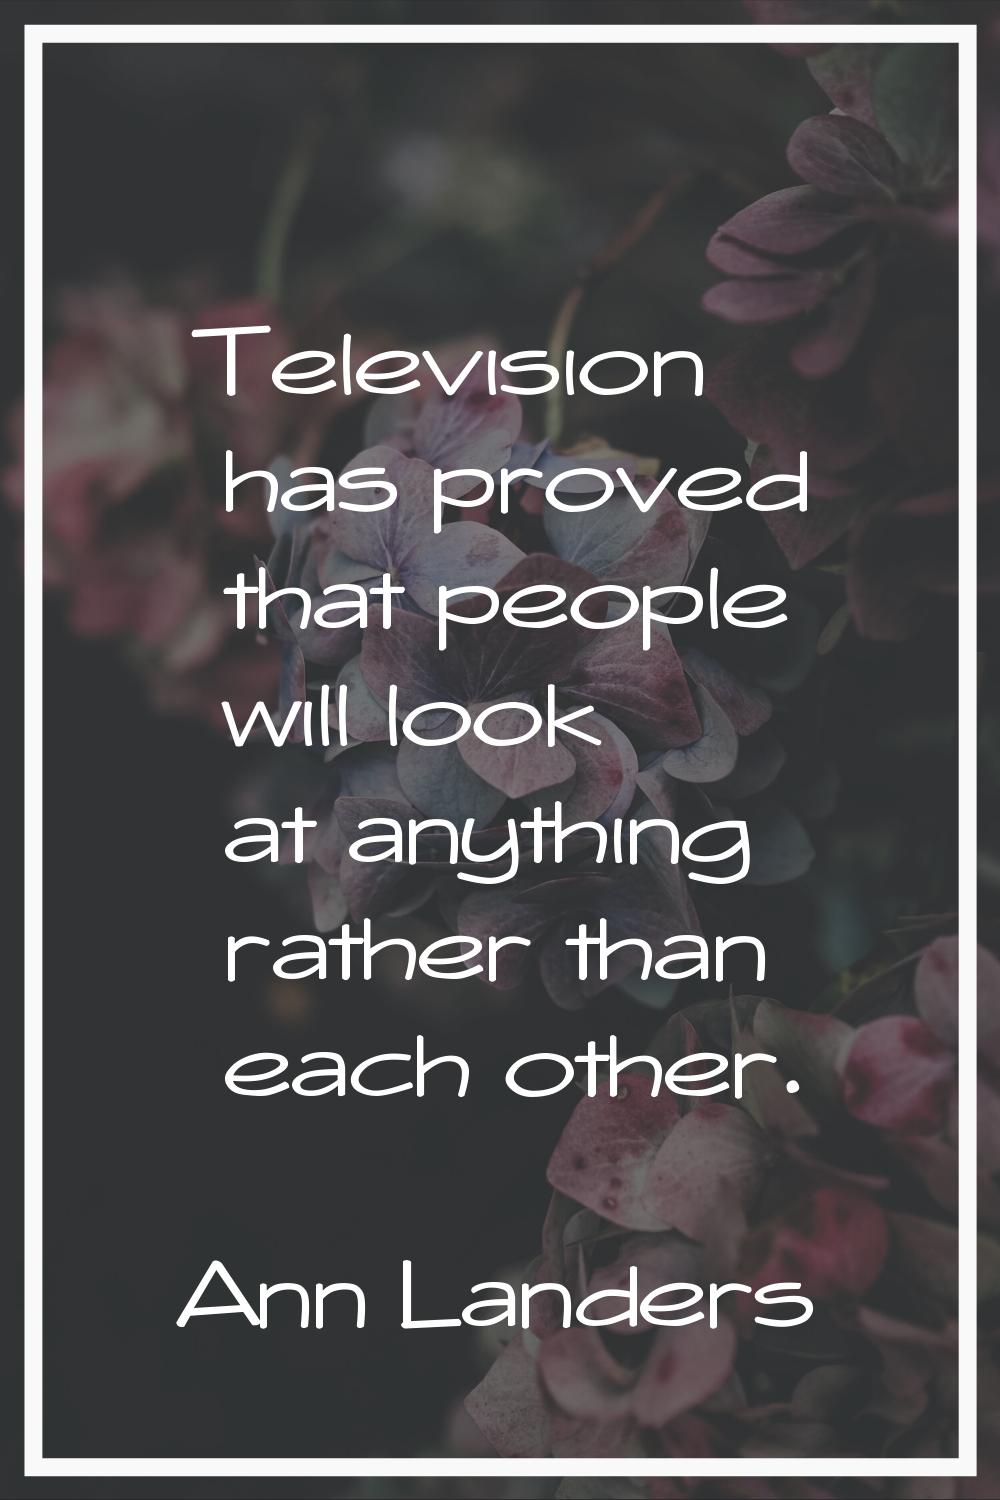 Television has proved that people will look at anything rather than each other.